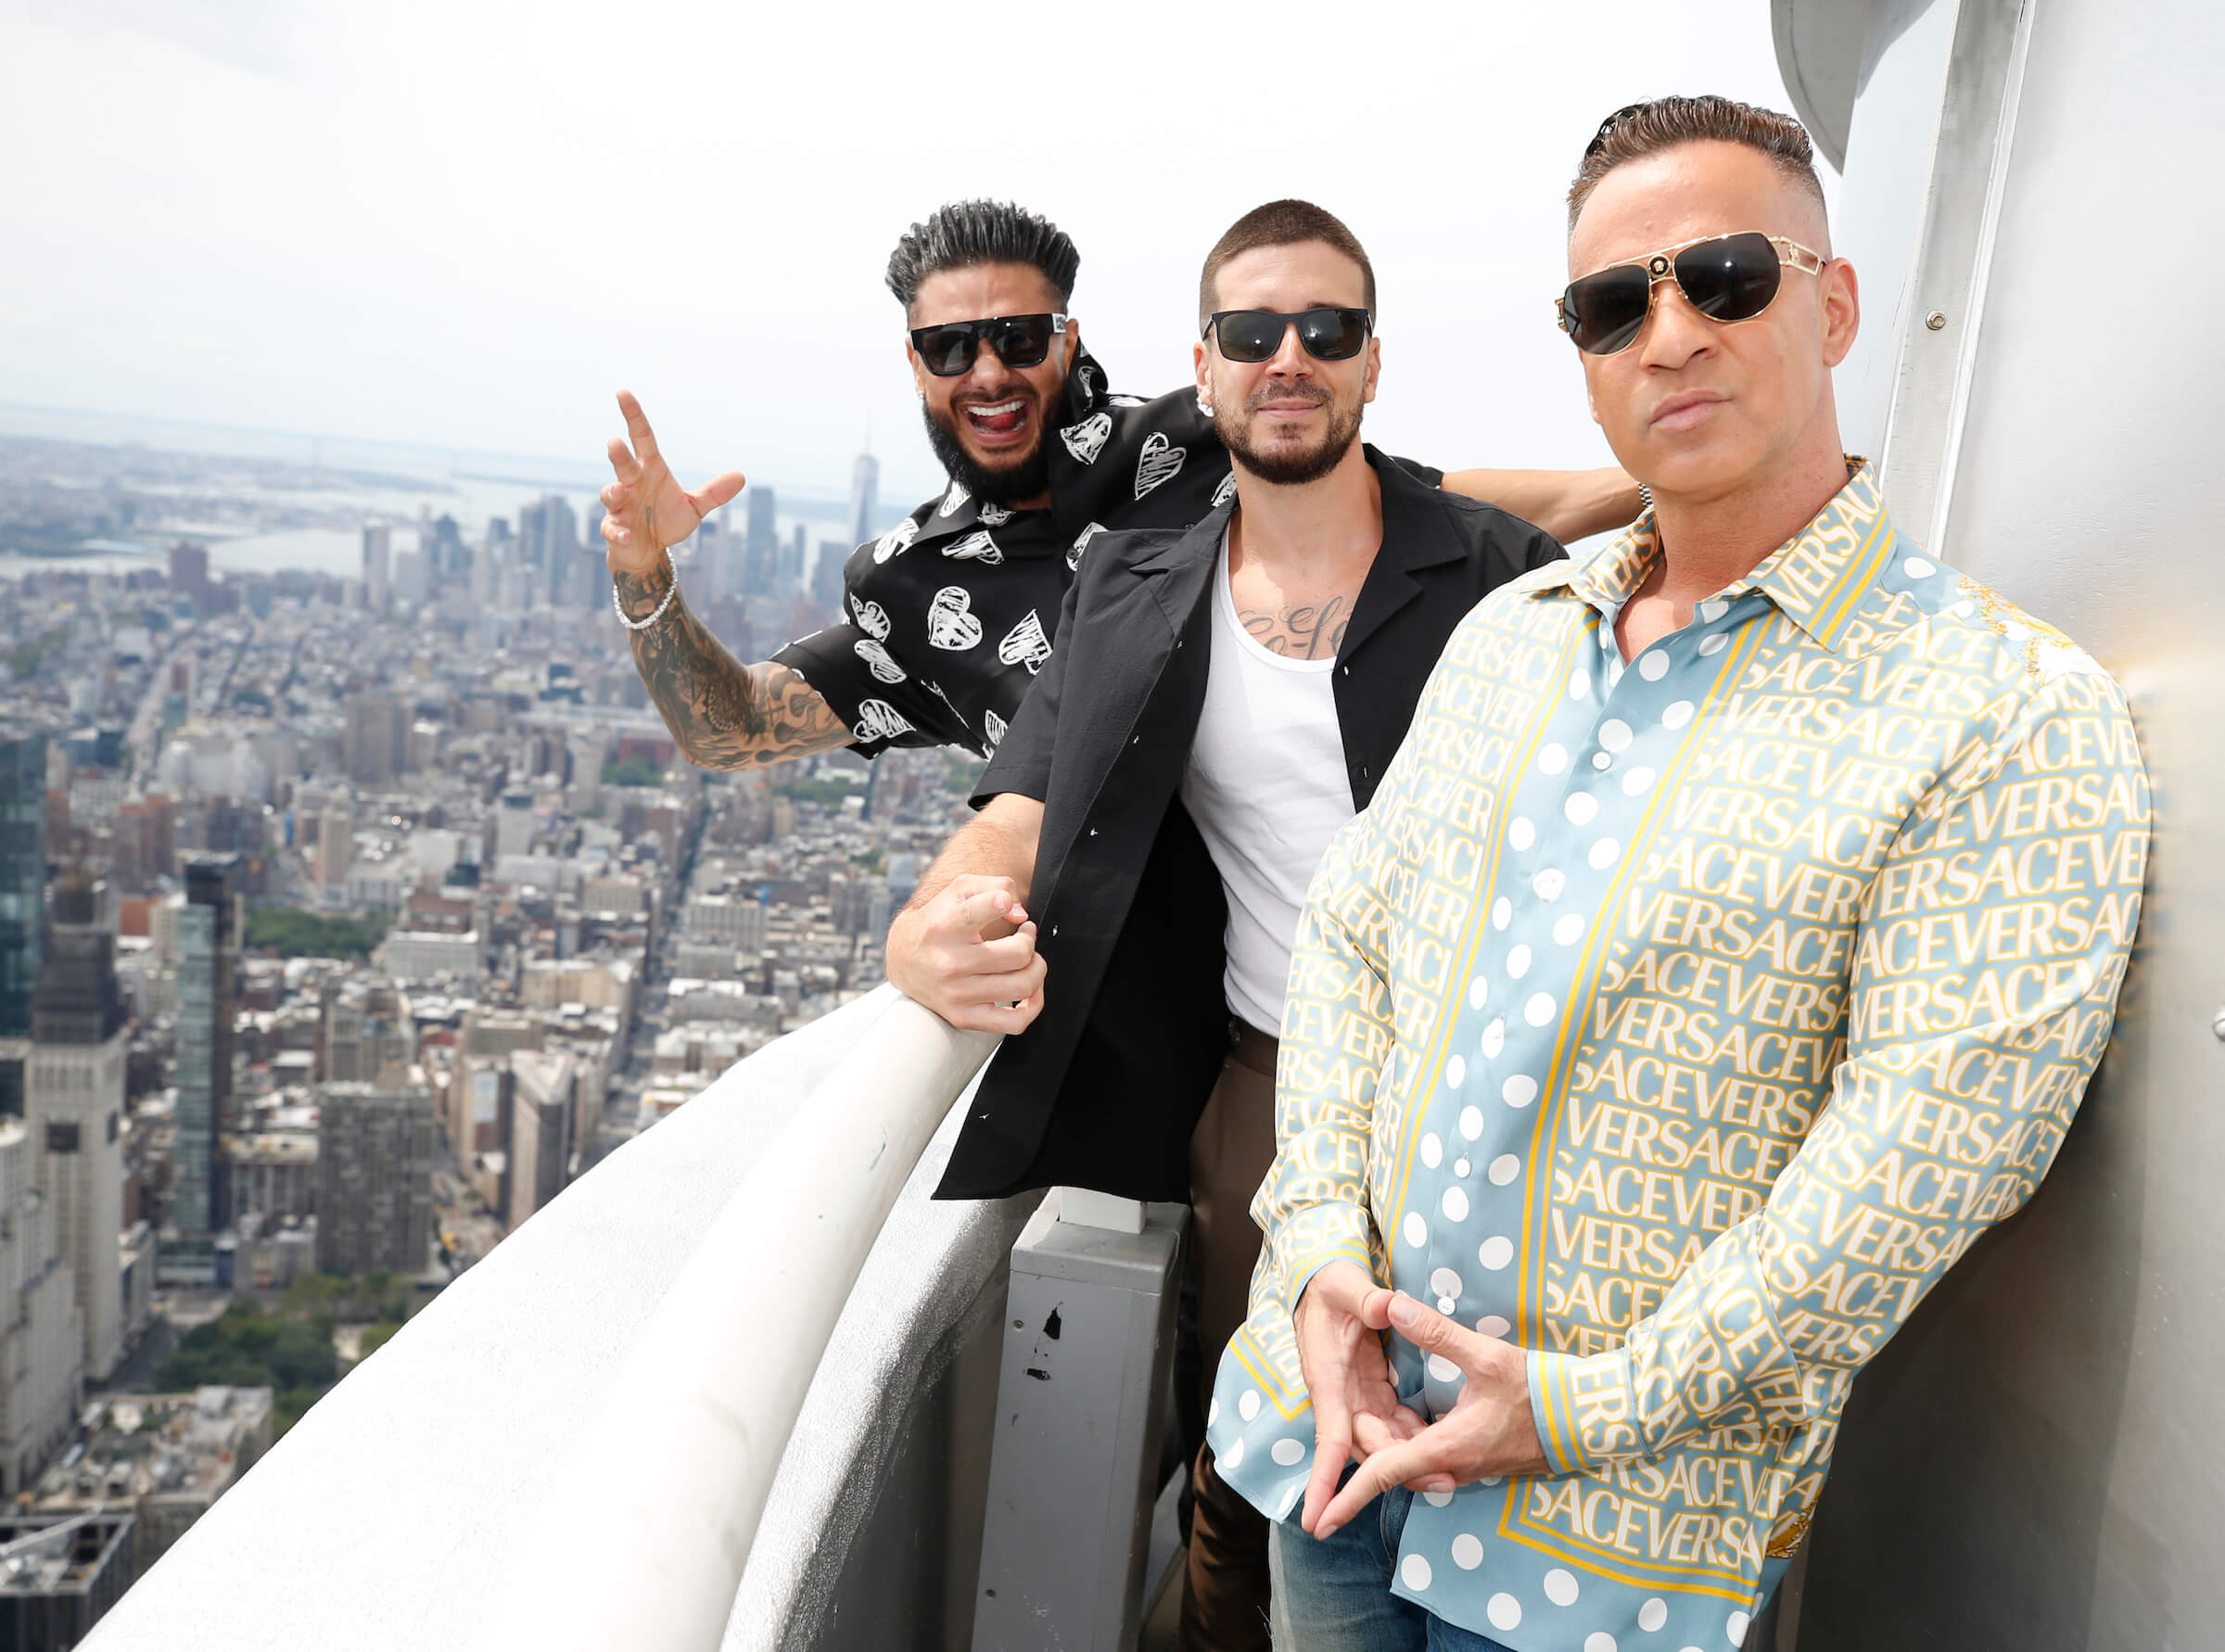 'Jersey Shore: Family Vacation' Season 7 stars DJ Pauly D, Vinny Guadagnino, and Mike 'The Situation' Sorrentino posing